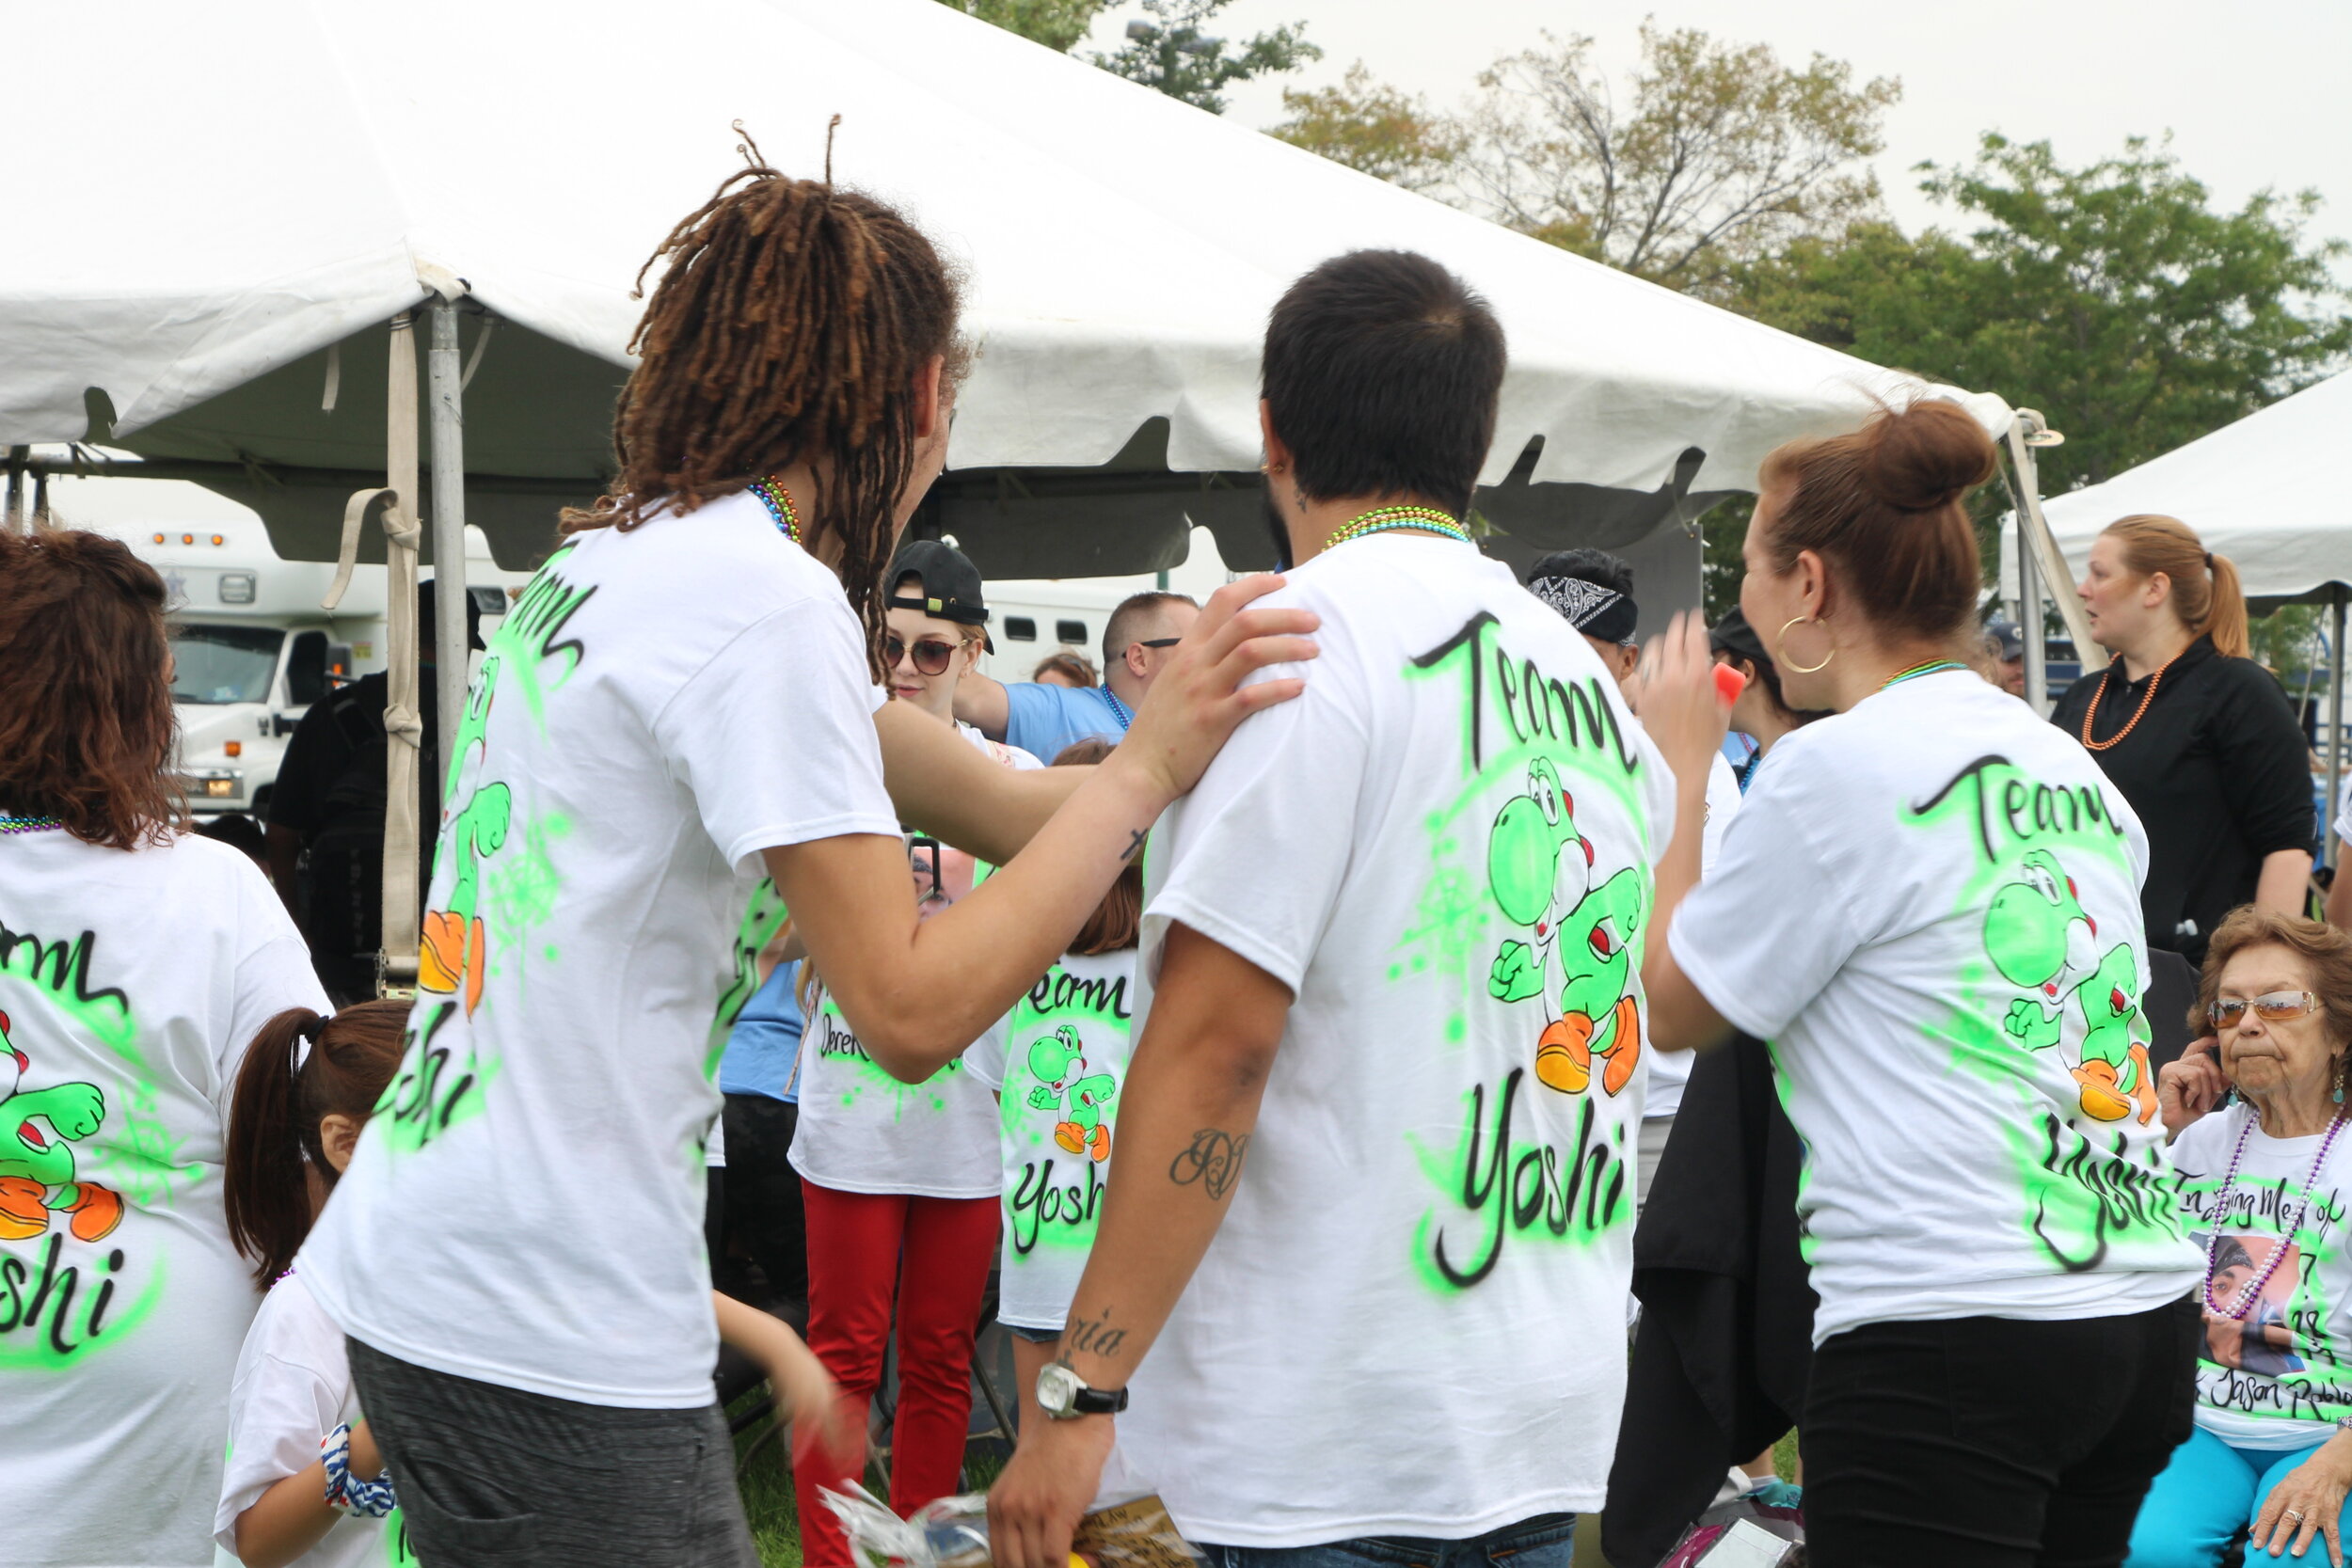 Team Yoshi met up to honor a lost loved one in matching customized T-Shirts.